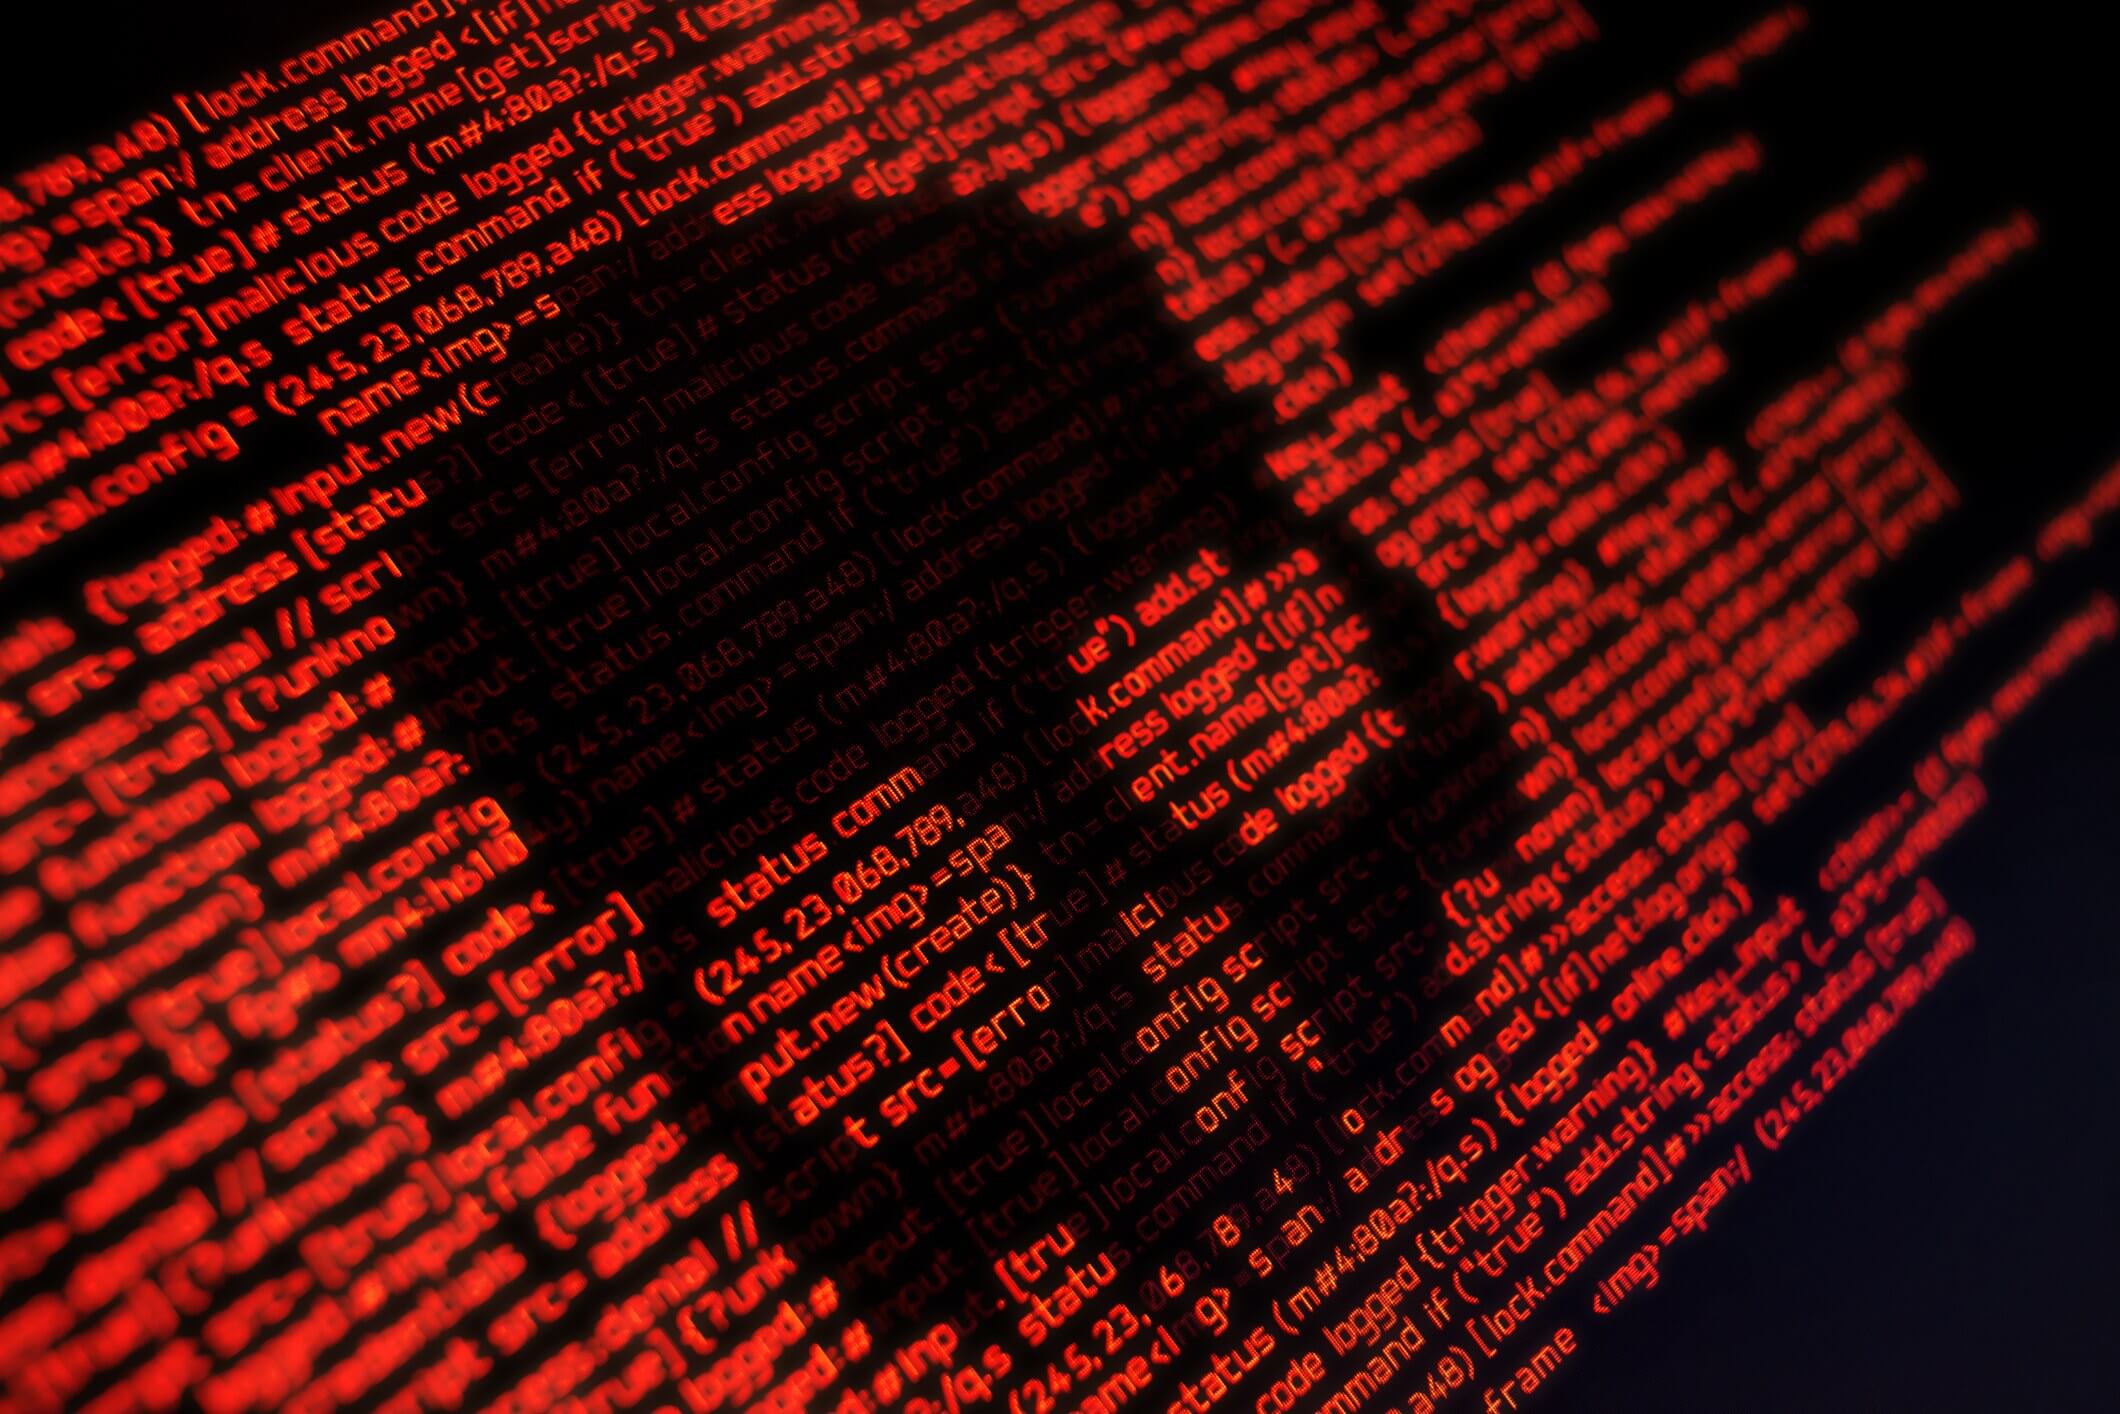 More than 25 million Android devices infected with 'Agent Smith' malware